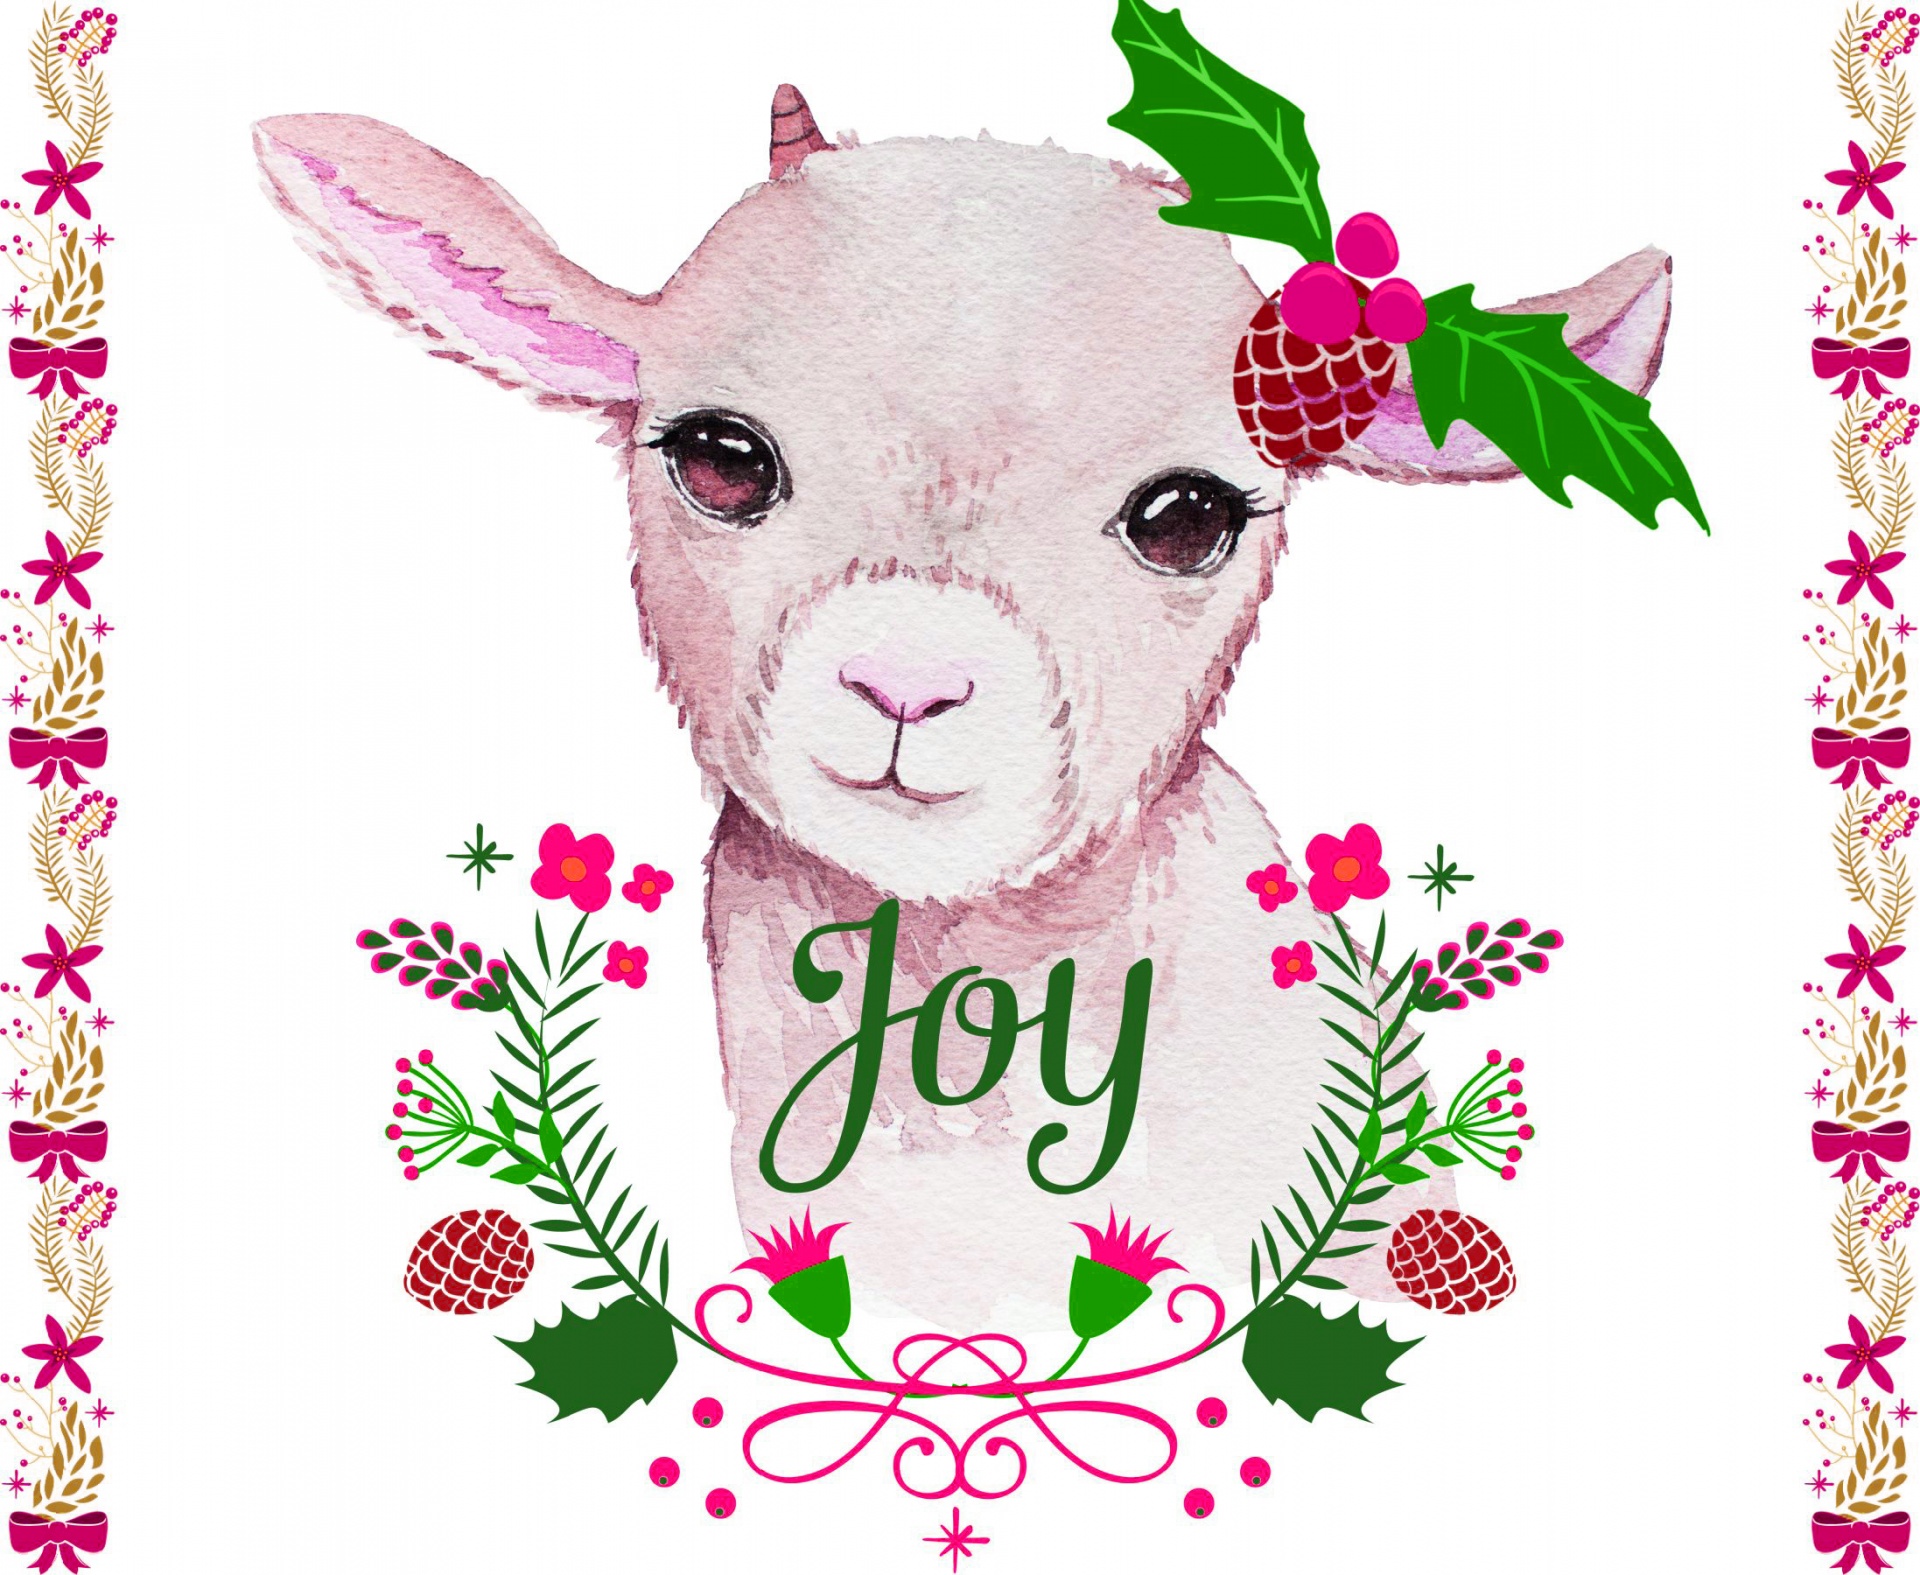 darling baby goat watercolor art with words JOY